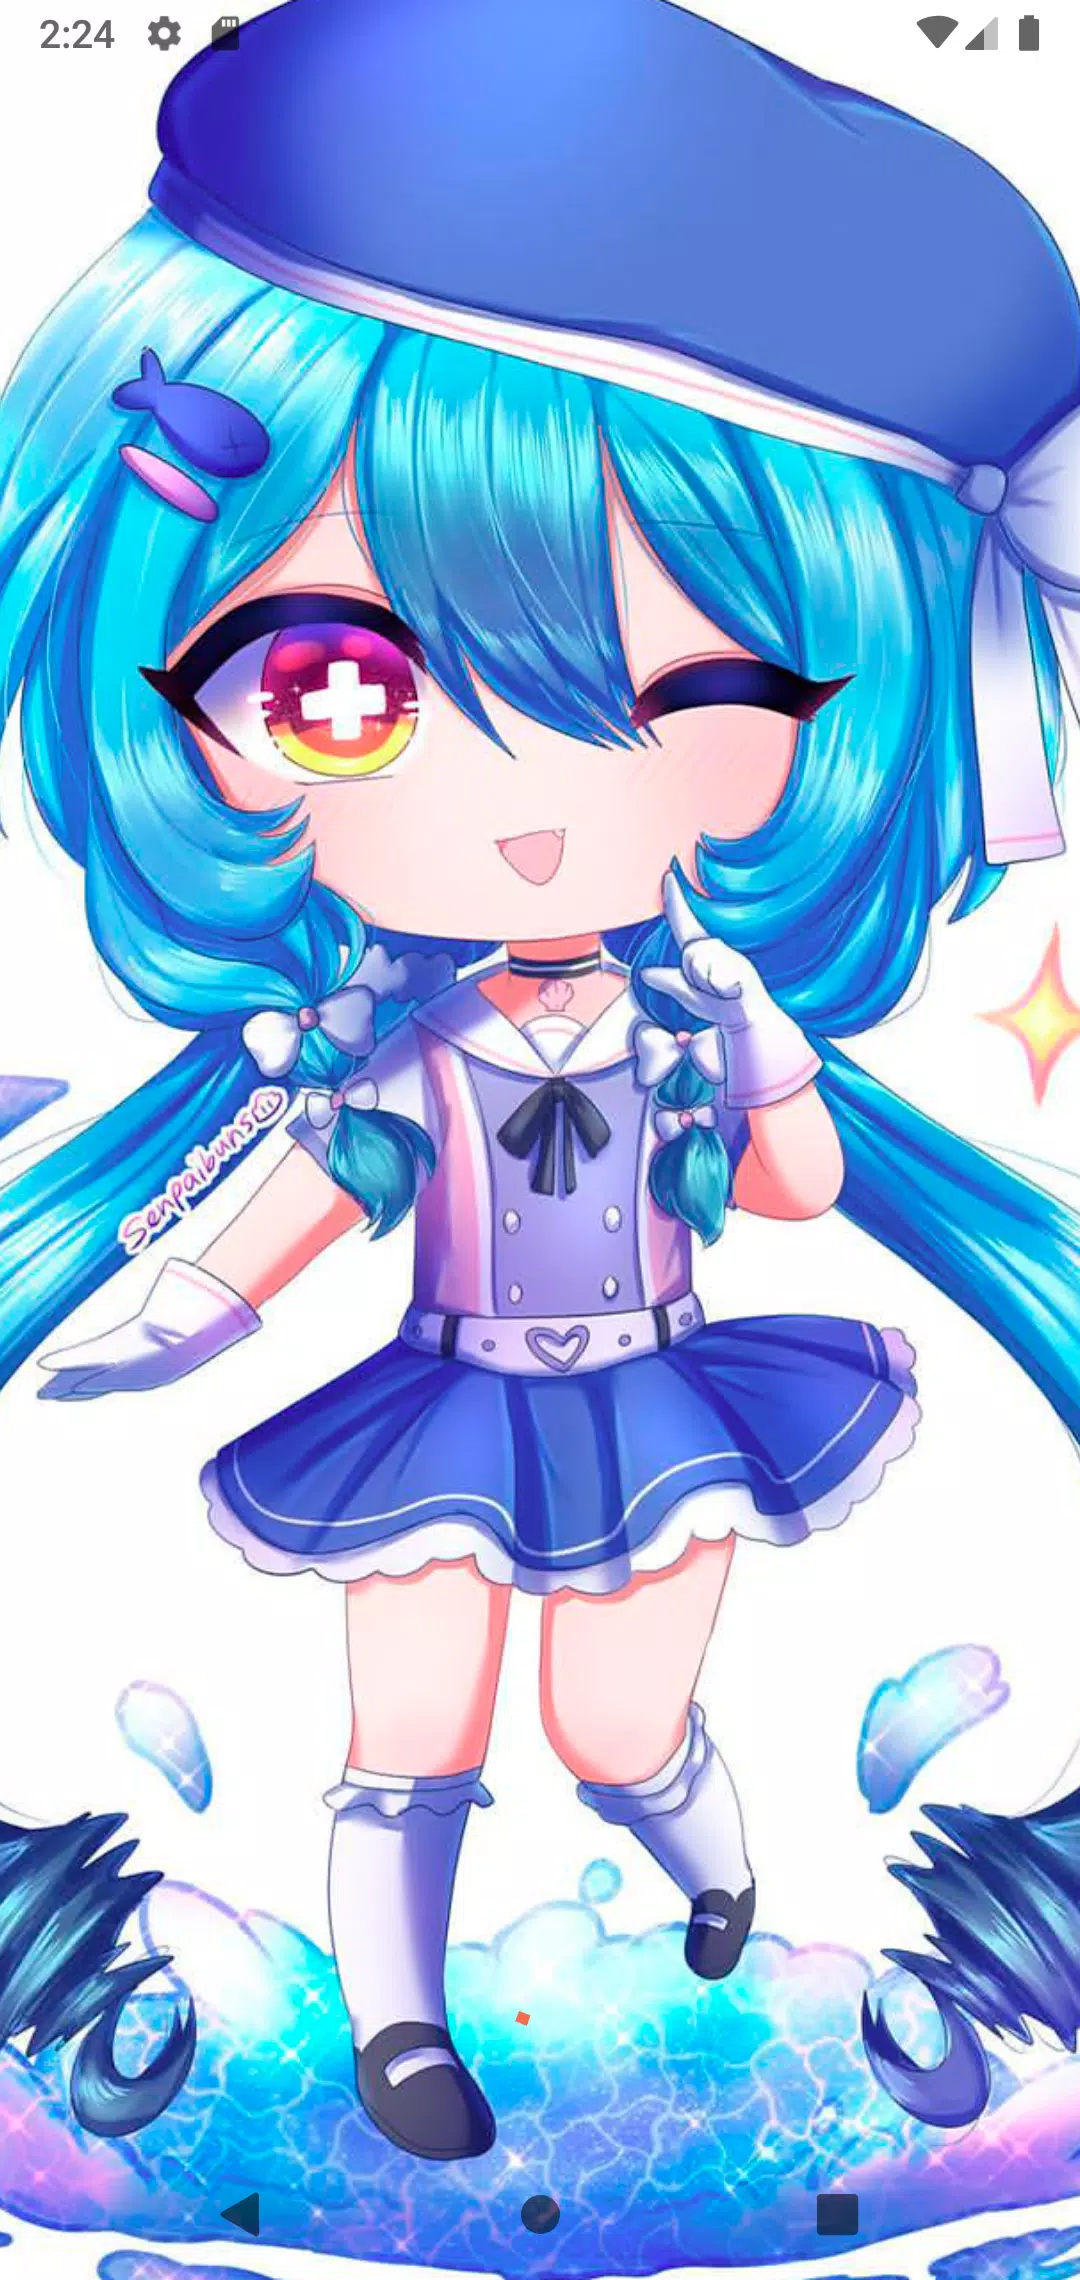 Download Cool Gacha Life style for any boy! Wallpaper